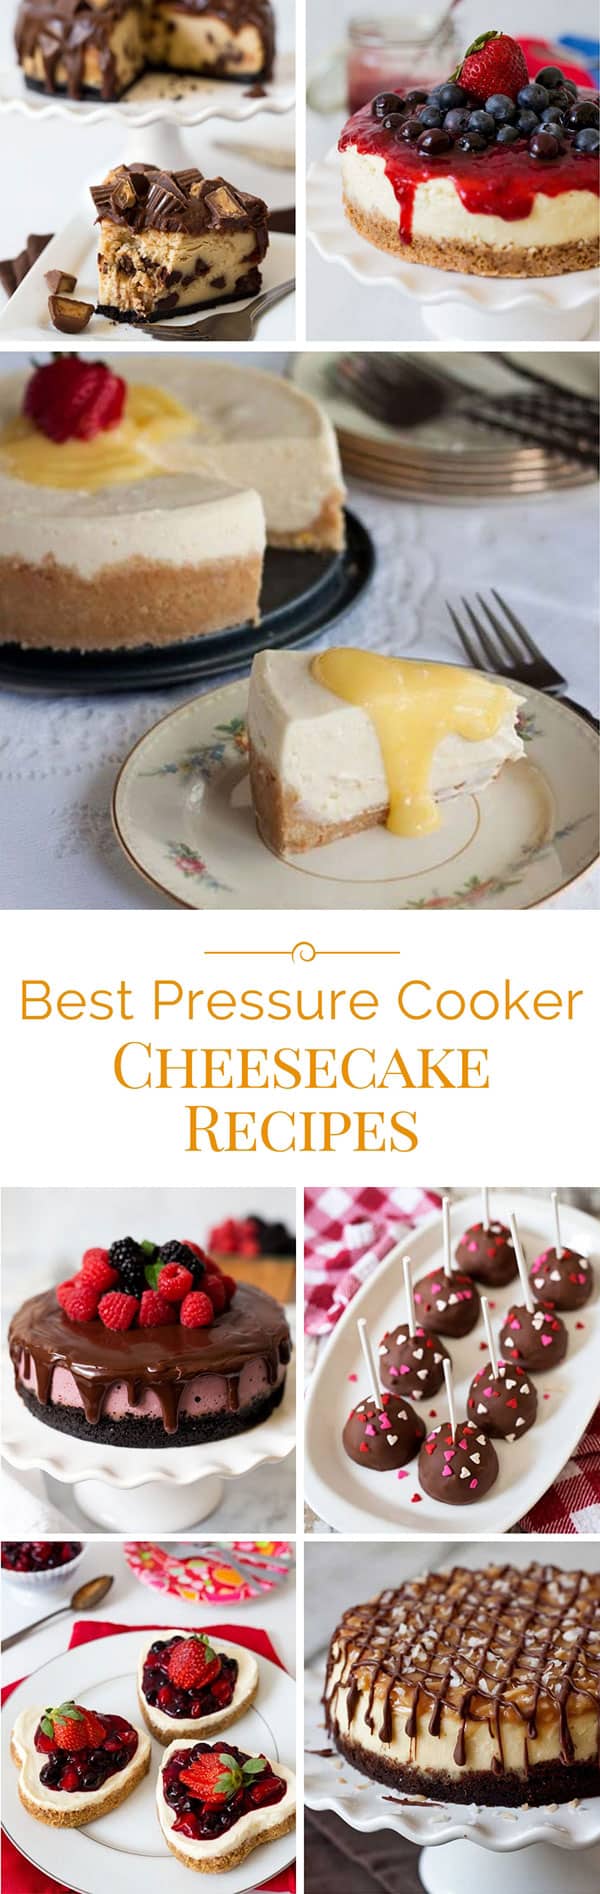 Best Pressure Cooker Cheesecake Recipes and Tips to Creating Perfect Cheesecake in your Pressure Cooker or Instant Pot